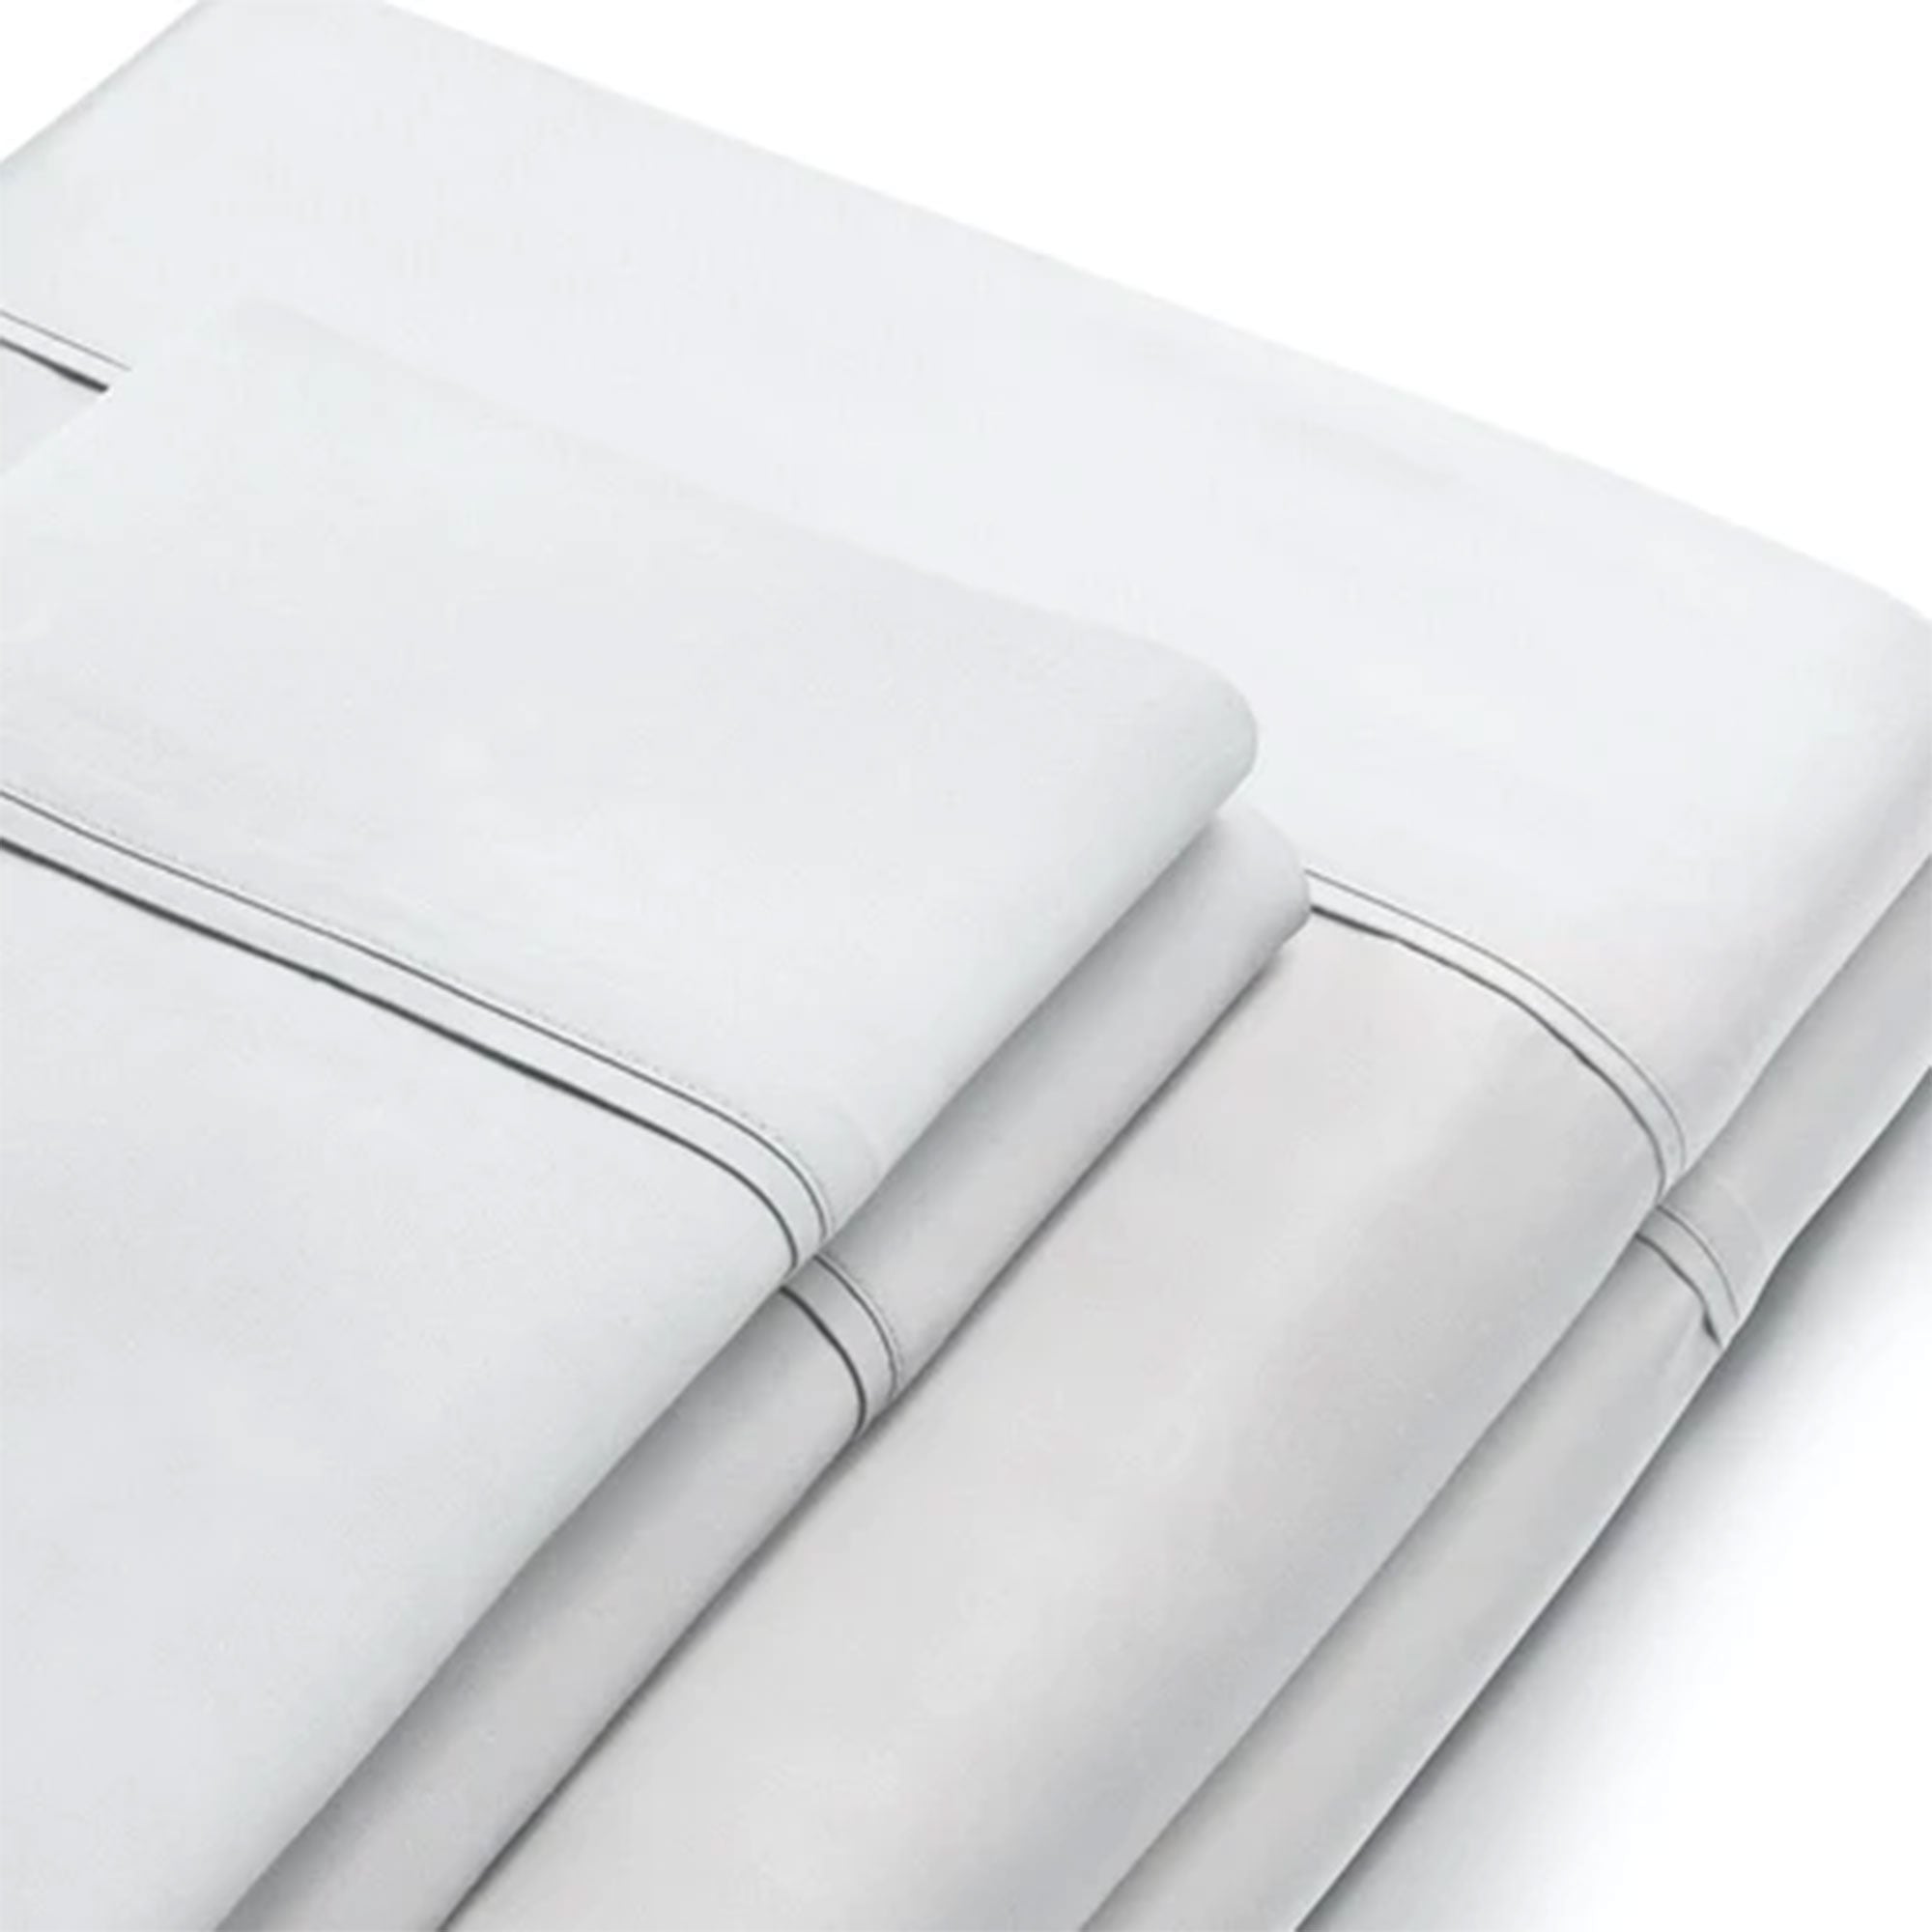 Sleepgram-Viscose-From-Bamboo-Queen-Bed-Sheet-Set-With-2-Pillowcases,-White-Blankets